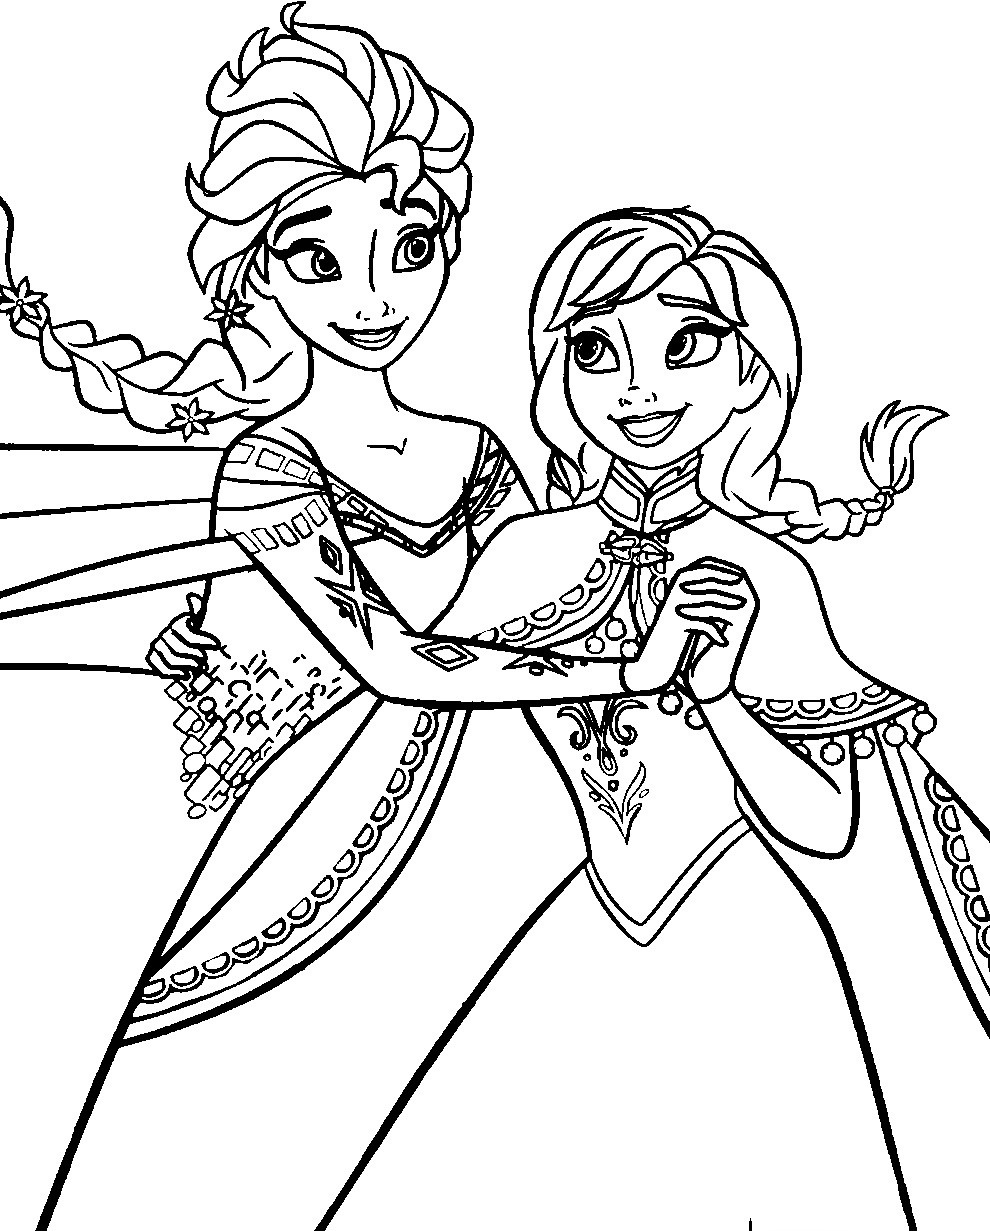 Coloring Book For Kids Frozen
 Disney Frozen Coloring Pages To Download